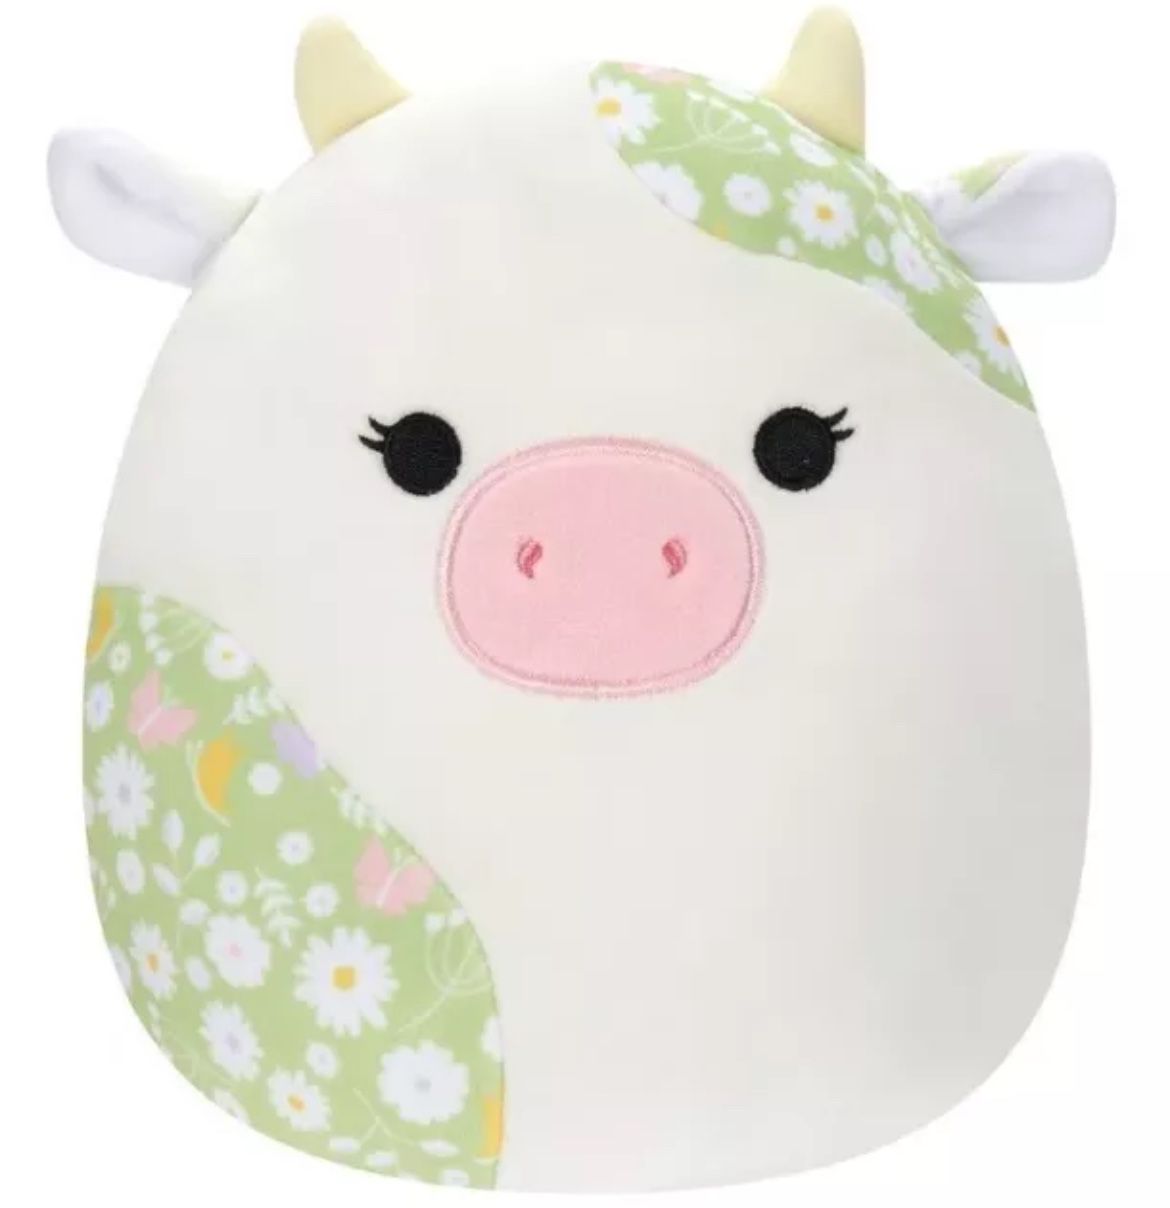 Hugging Pillow Toy Cute Stuffed Soft Plushie Decor for Kids - Ada Cow 8''